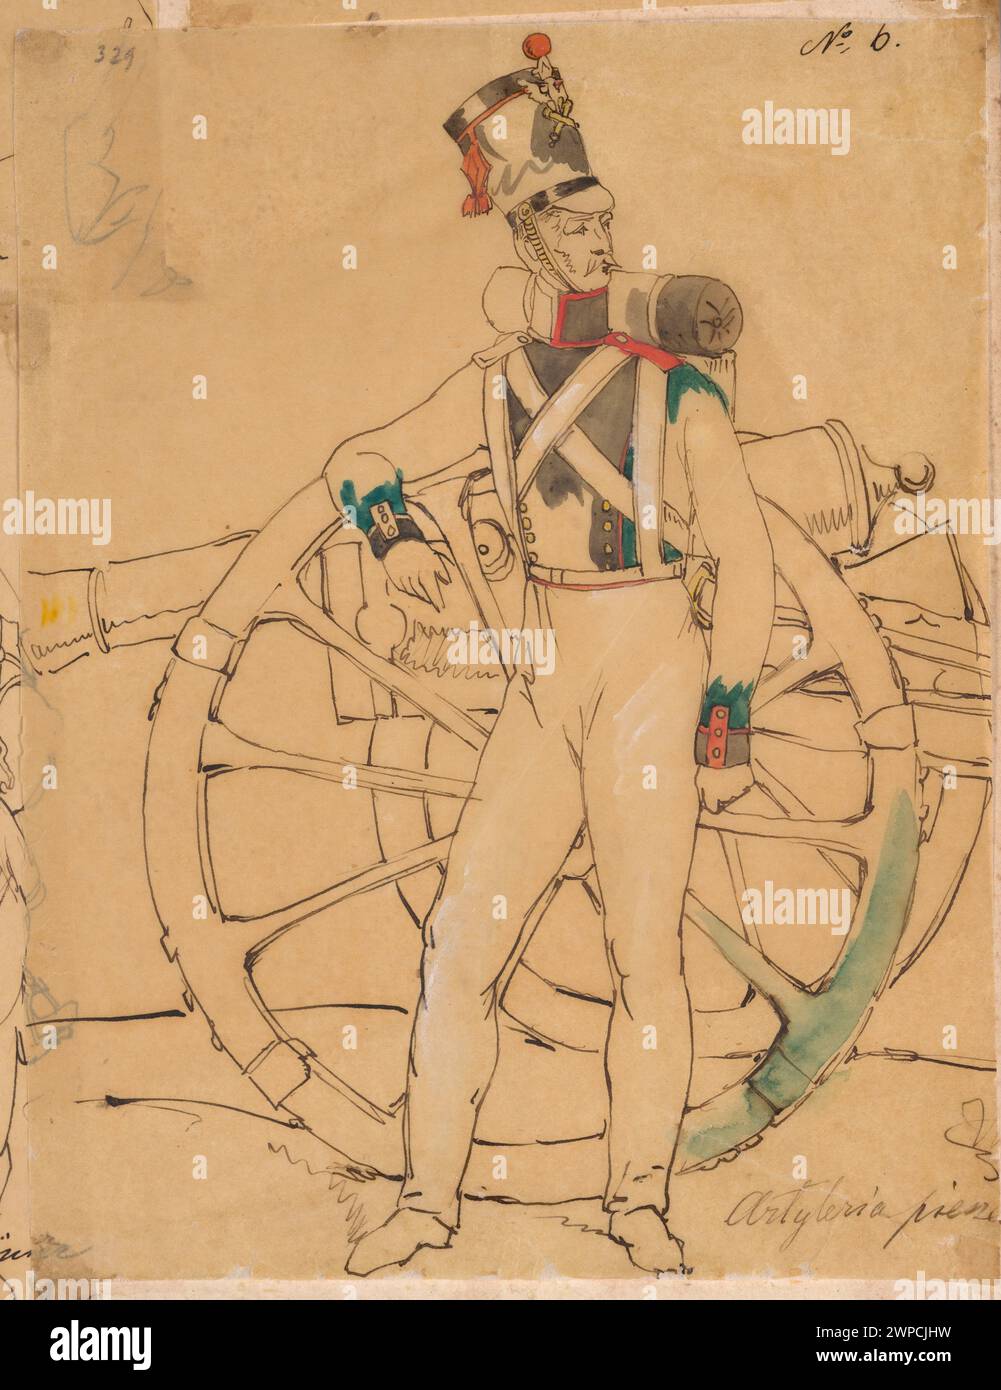 An artilleryist at the Arma, a color of color lithography in the album: 'Polish Army. A collection of all species of the Polish Army in 1831'; Czachórski, Władysław (1850-1911), Simon, Karol Antoni (Poznań; Litographic Plant; 1819-1841), Mielcarzewicz, Teofil (1807-1879); after 1870 (1871-00-00-1877-00-00); Stock Photo